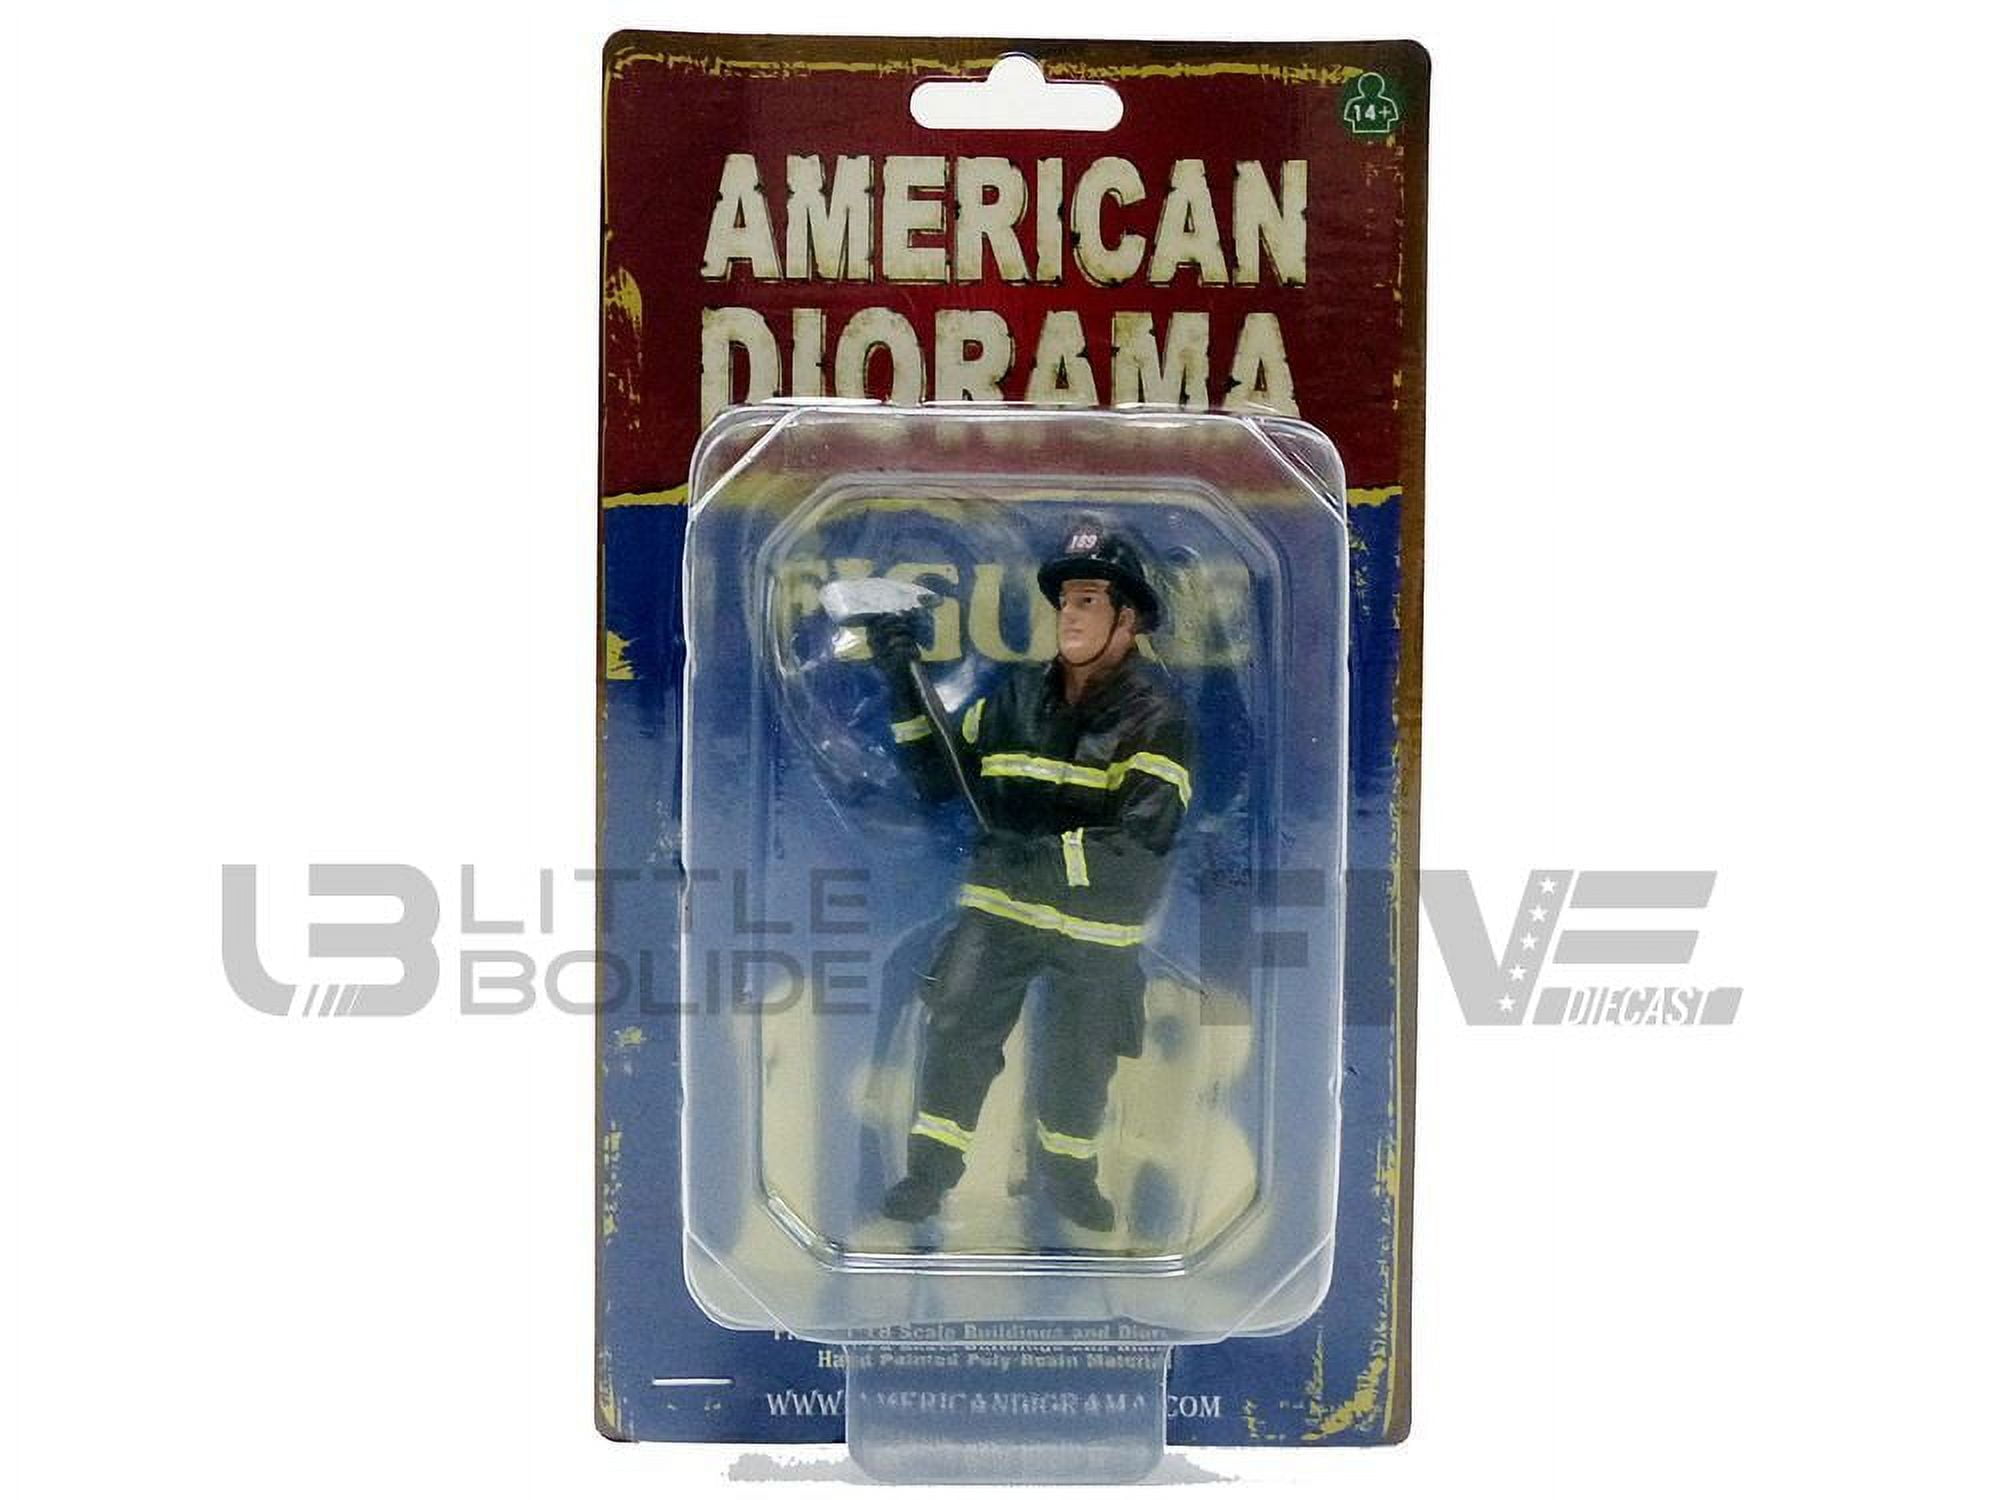 Firefighter With Axe Figurine For 1 Isto 18 Models